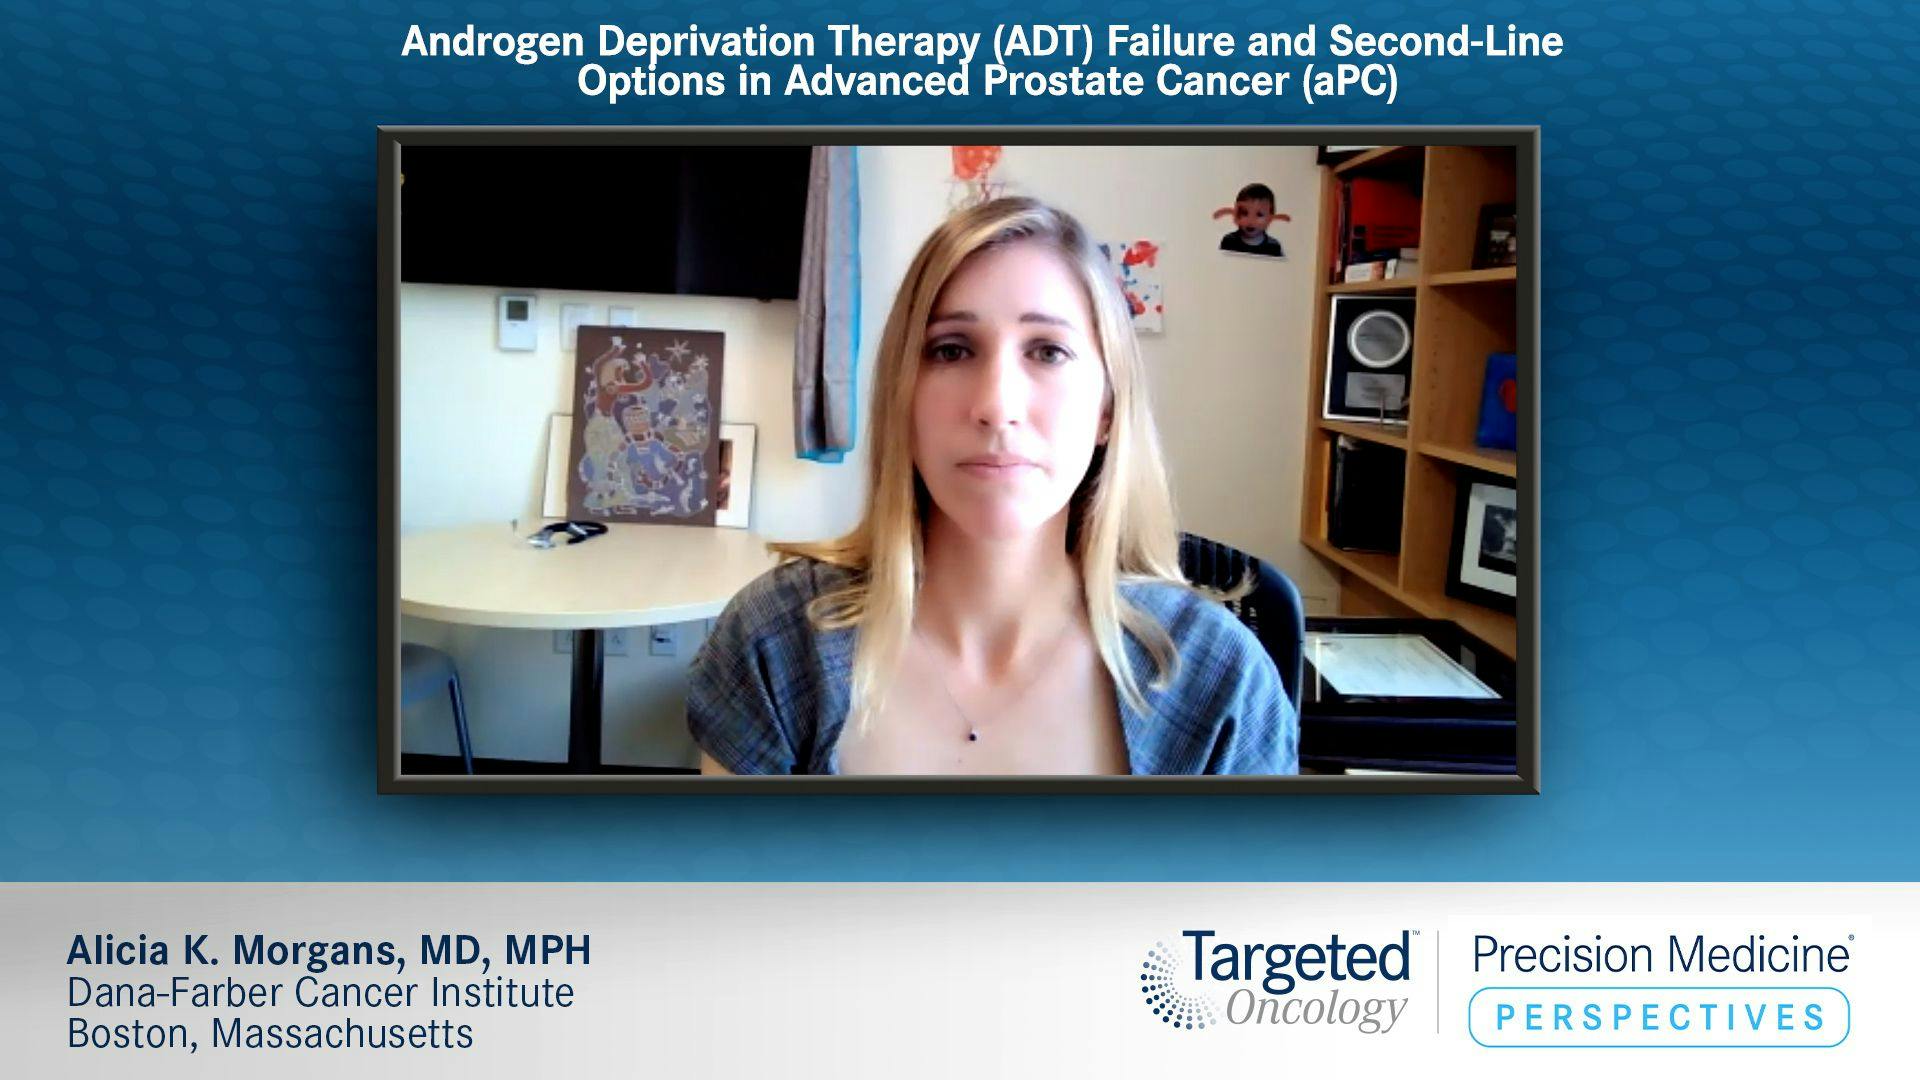 EP. 3A: Androgen Deprivation Therapy Failure and Second-Line Options in Advanced Prostate Cancer